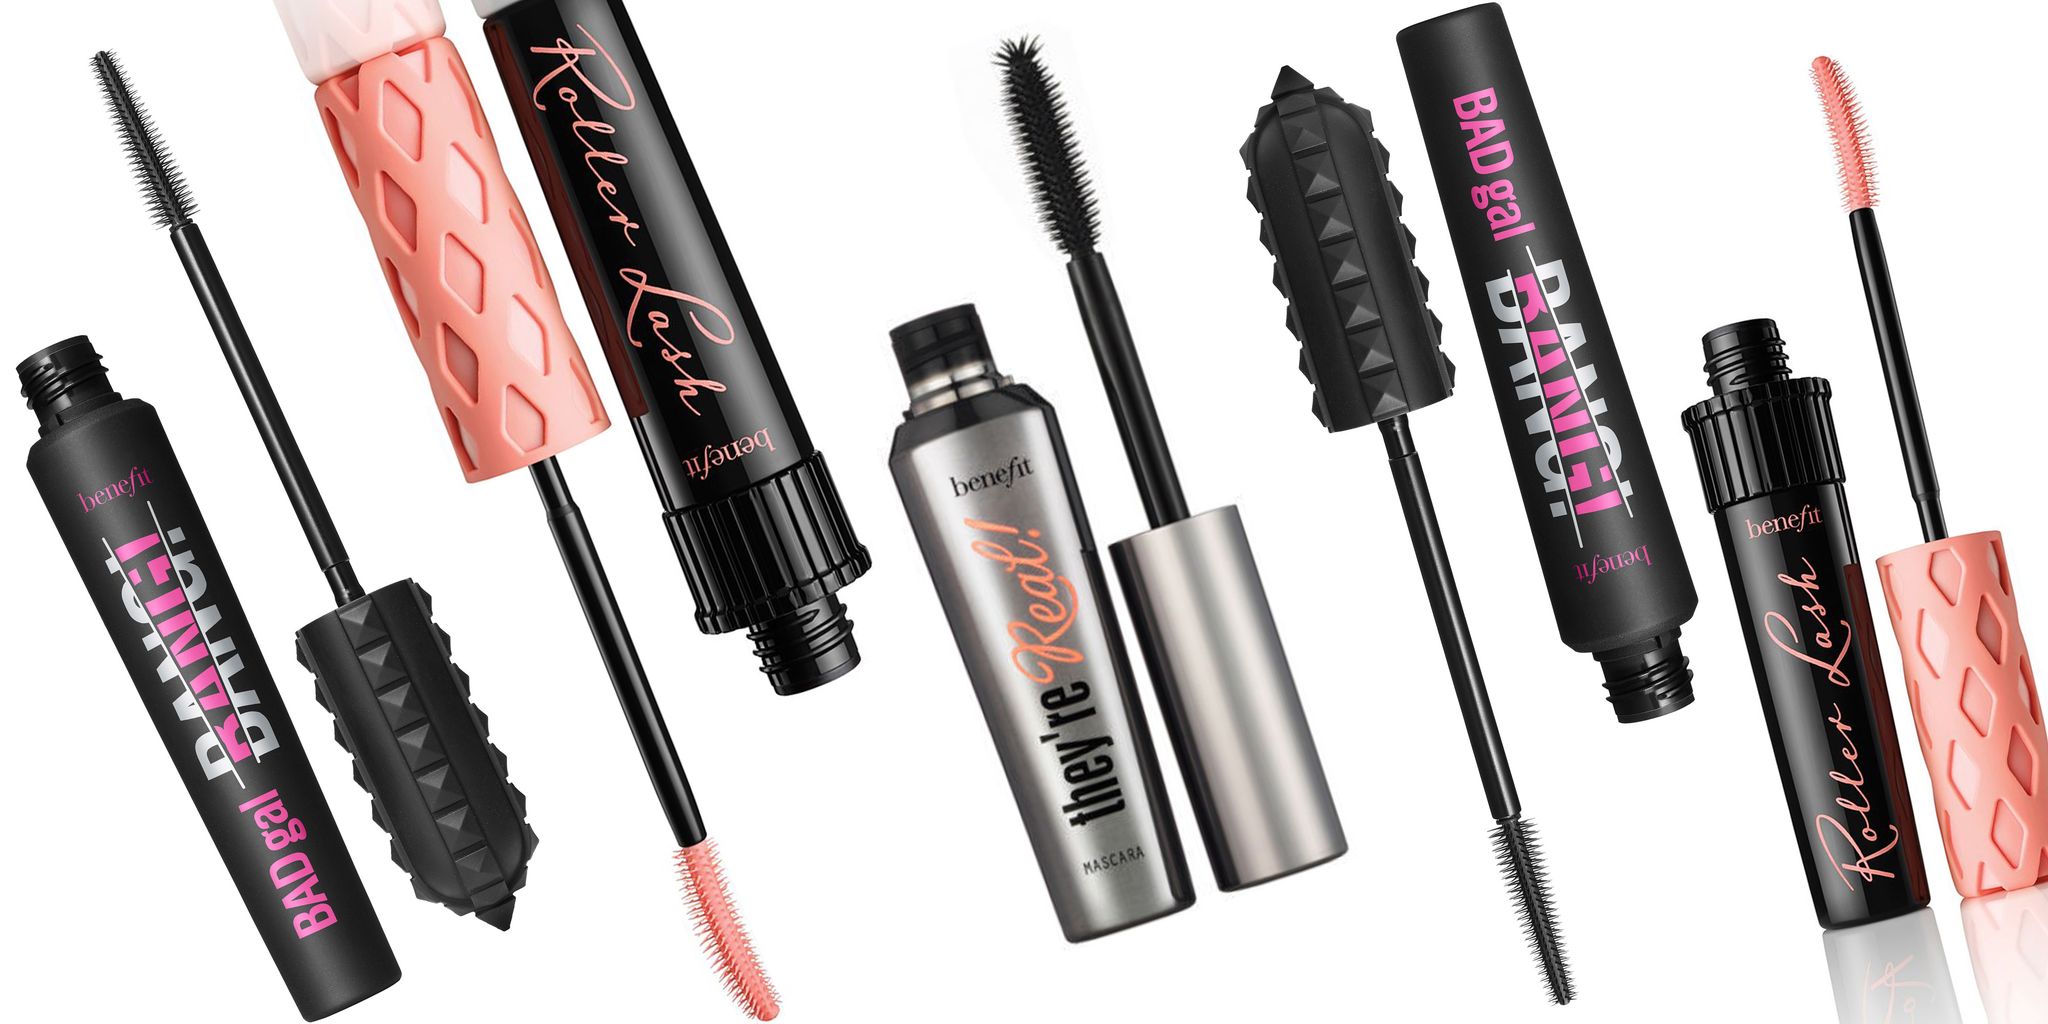 Benefit Cosmetics Is Donating May Eyebrow Wax Proceeds to Charity